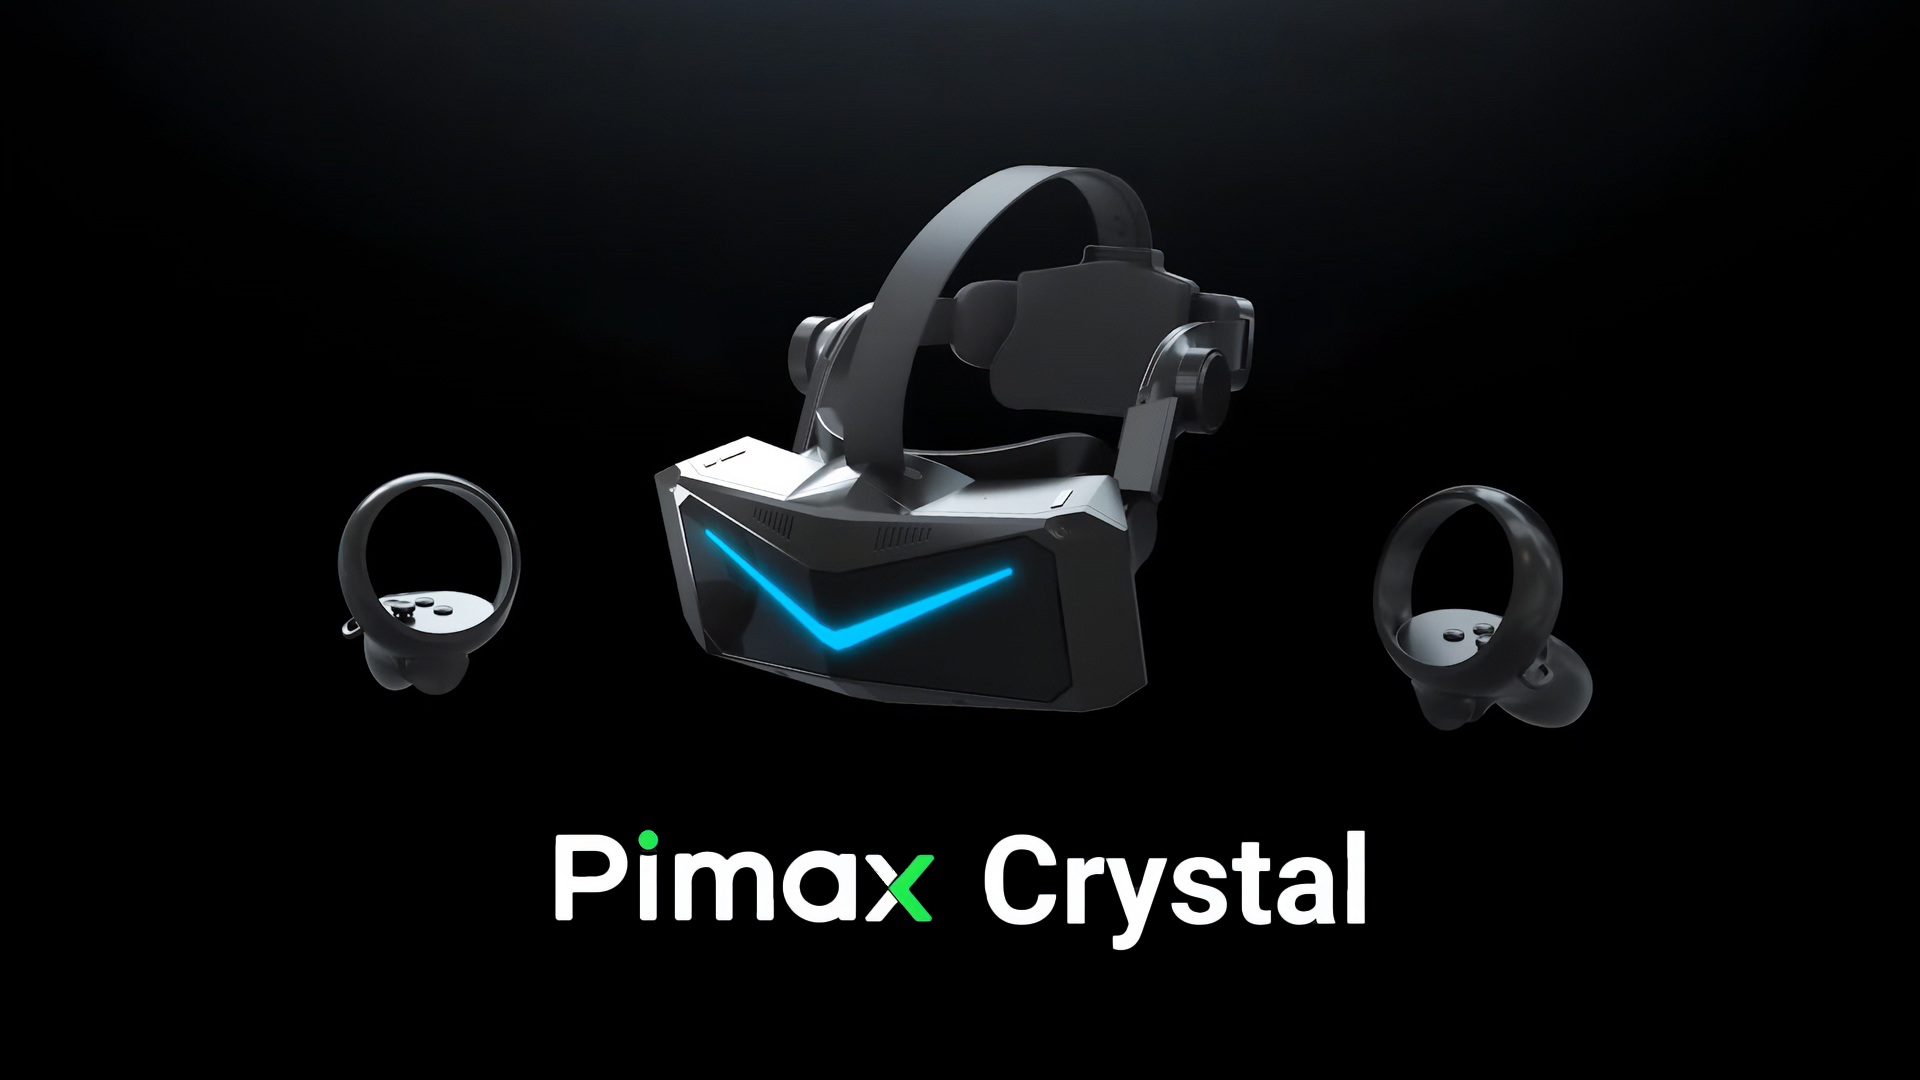 Update your Pimax Crystal! It adds free eye-tracking and access to